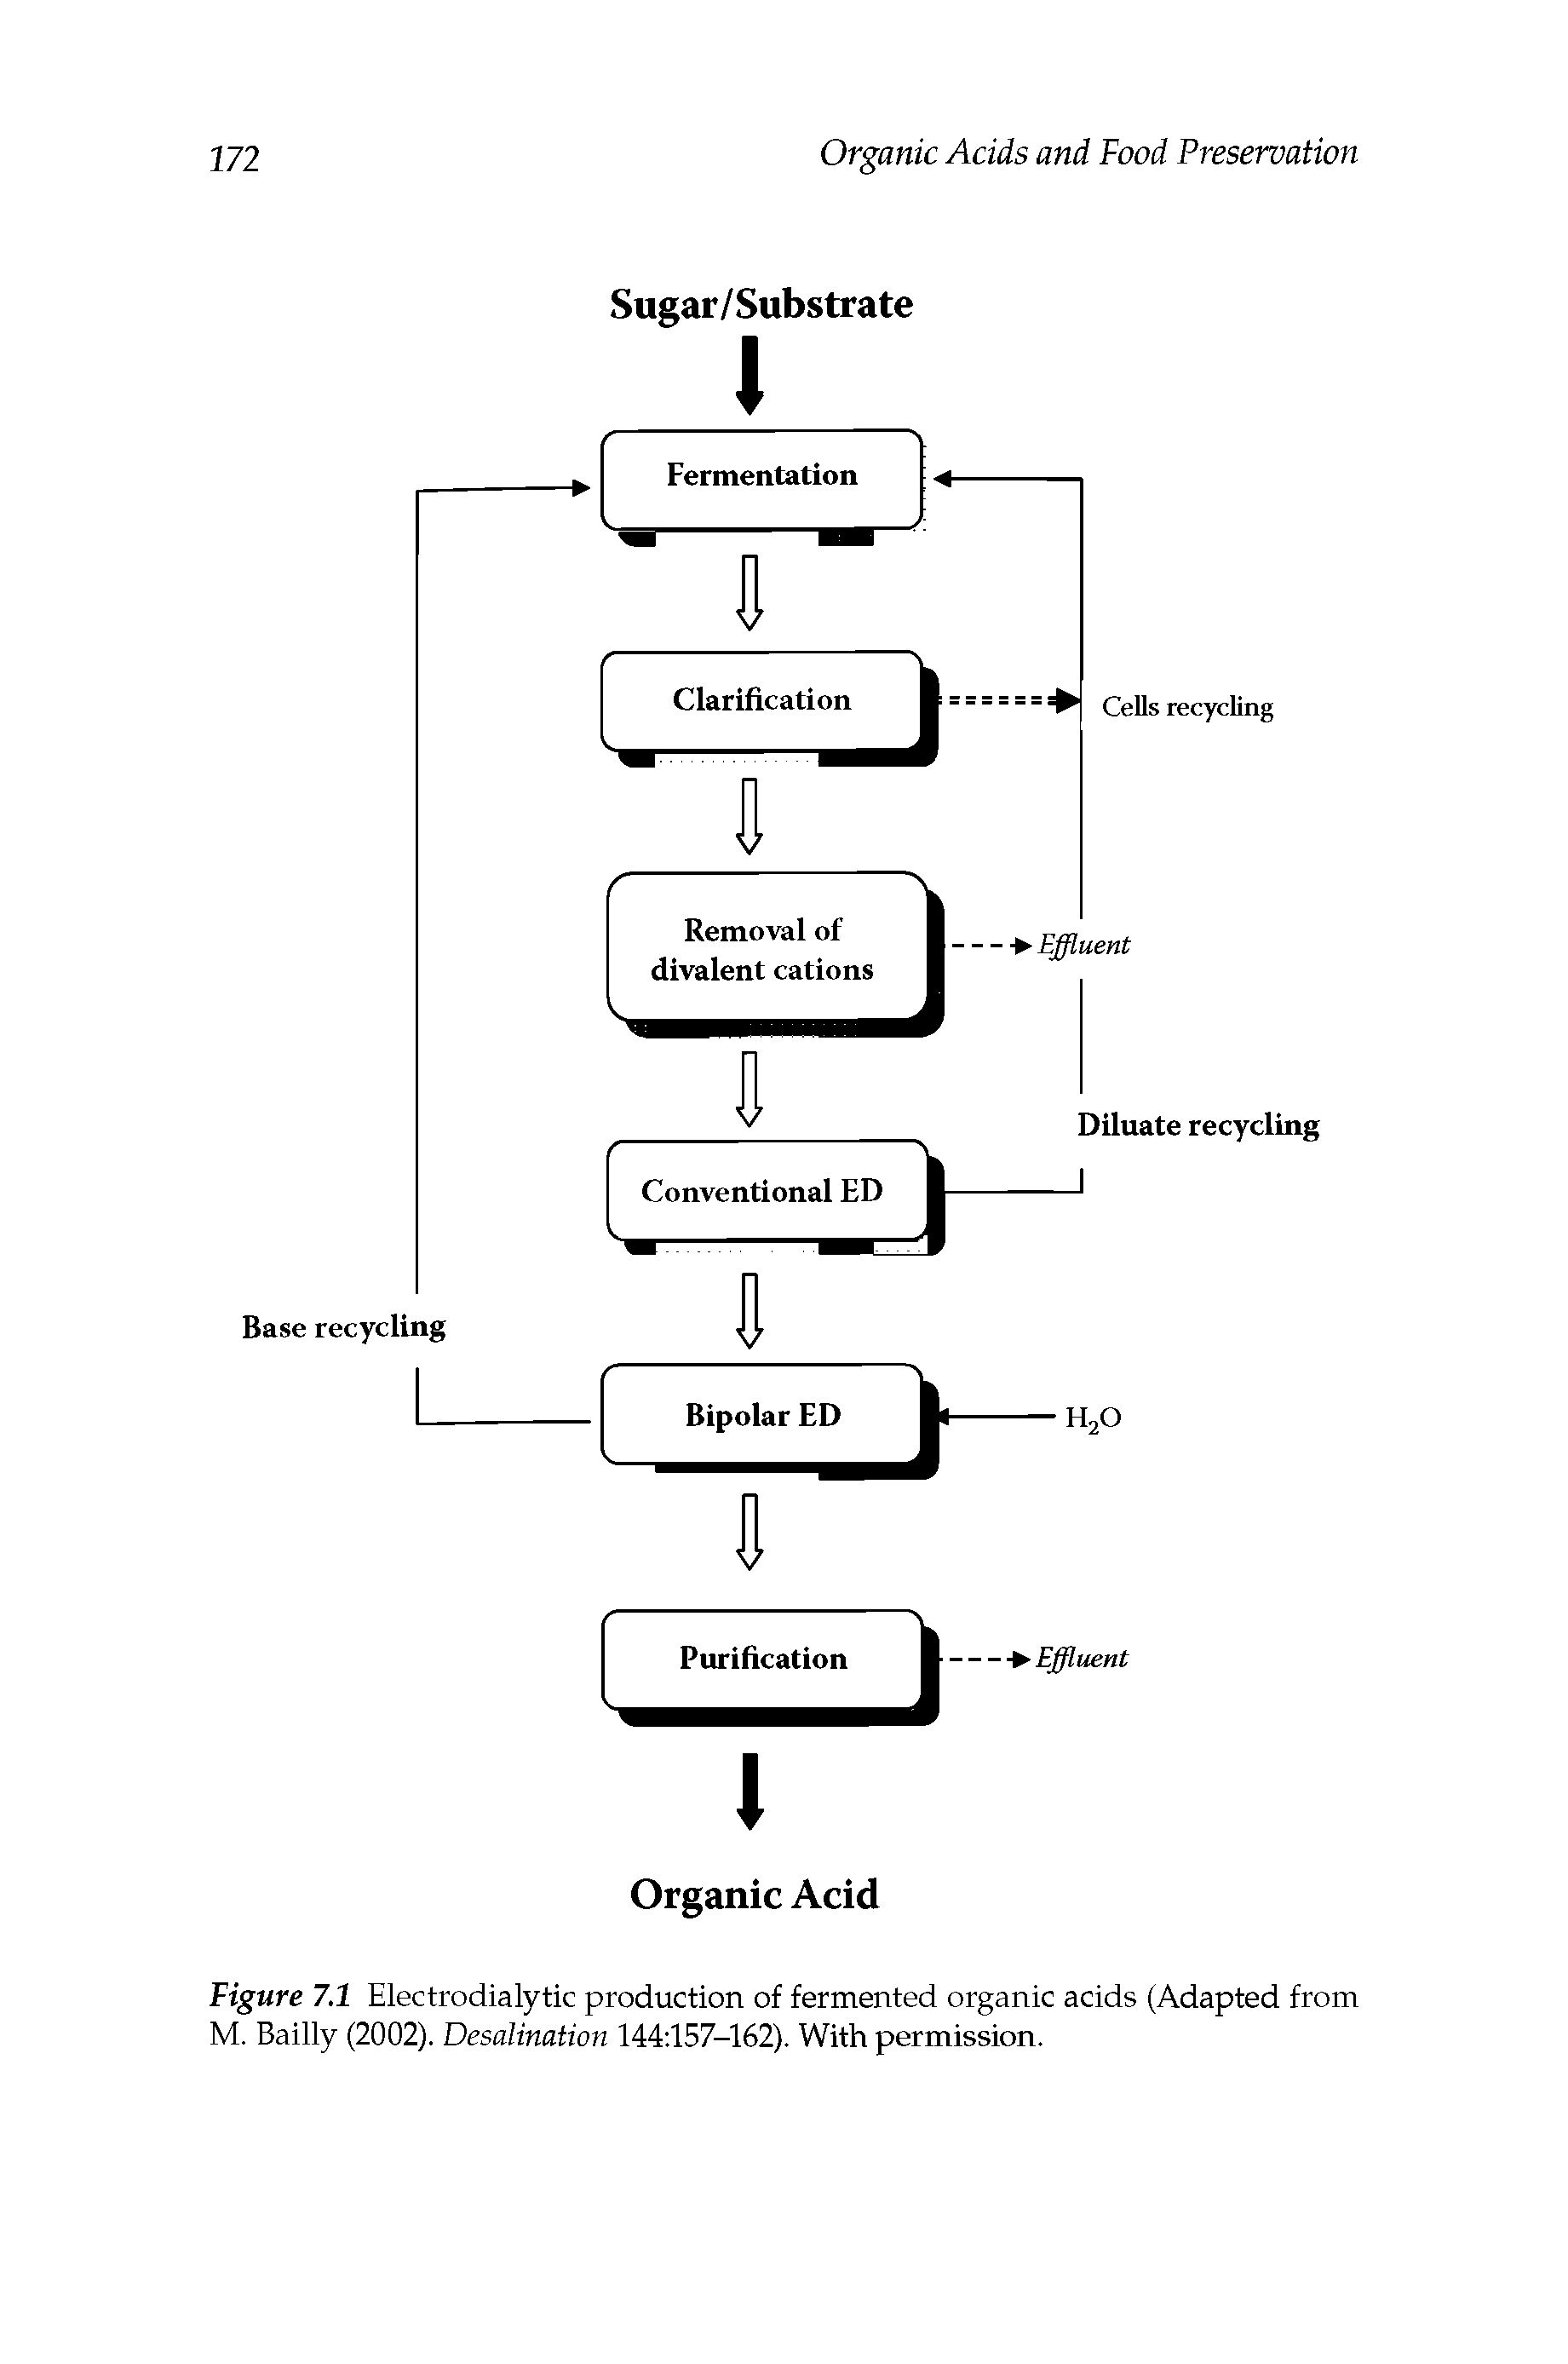 Figure 7.1 Electrodialytic production of fermented organic acids (Adapted from M. Bailly (2002). Desalination 144 157-162). With permission.